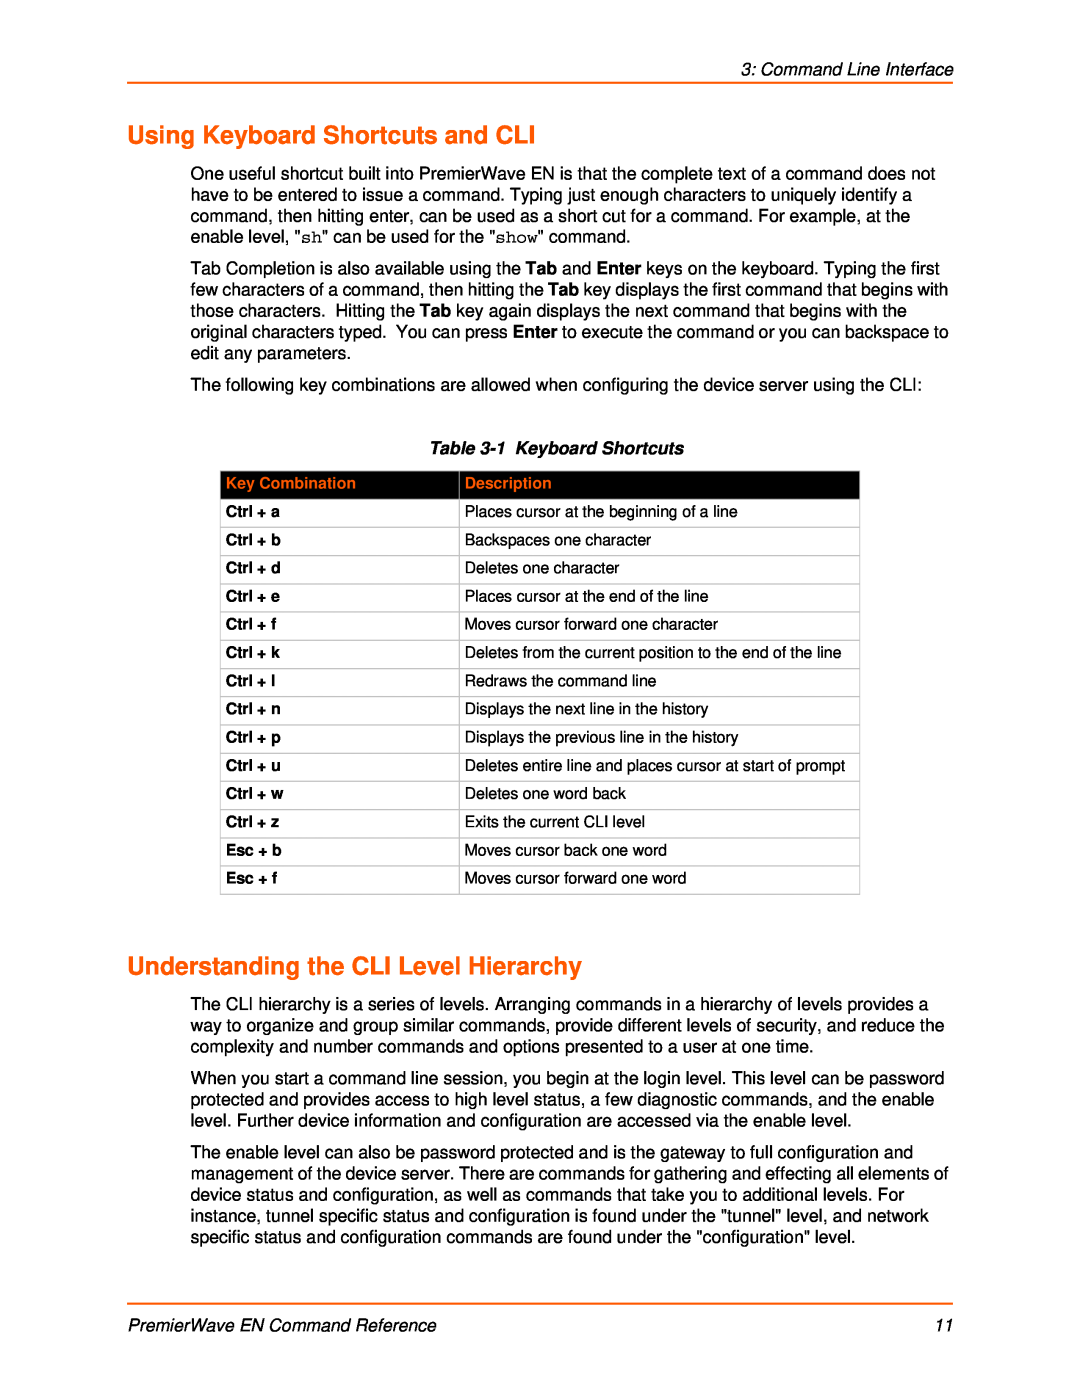 Lantronix 900-581 manual Using Keyboard Shortcuts and CLI, Understanding the CLI Level Hierarchy, Command Line Interface 